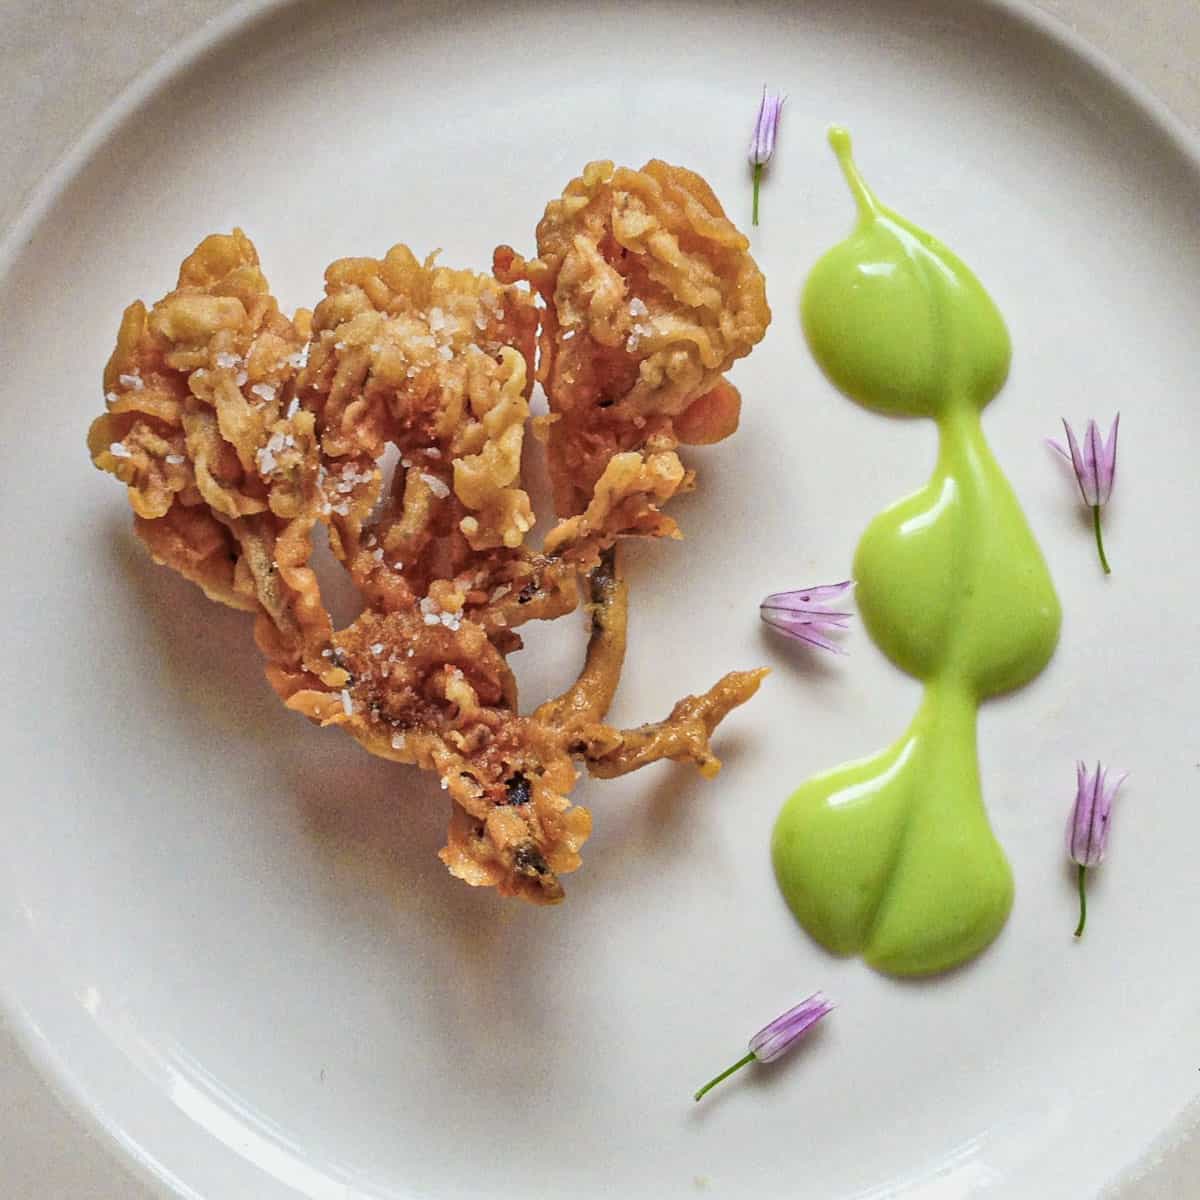 Crispy fried coral mushrooms, with chive aioli